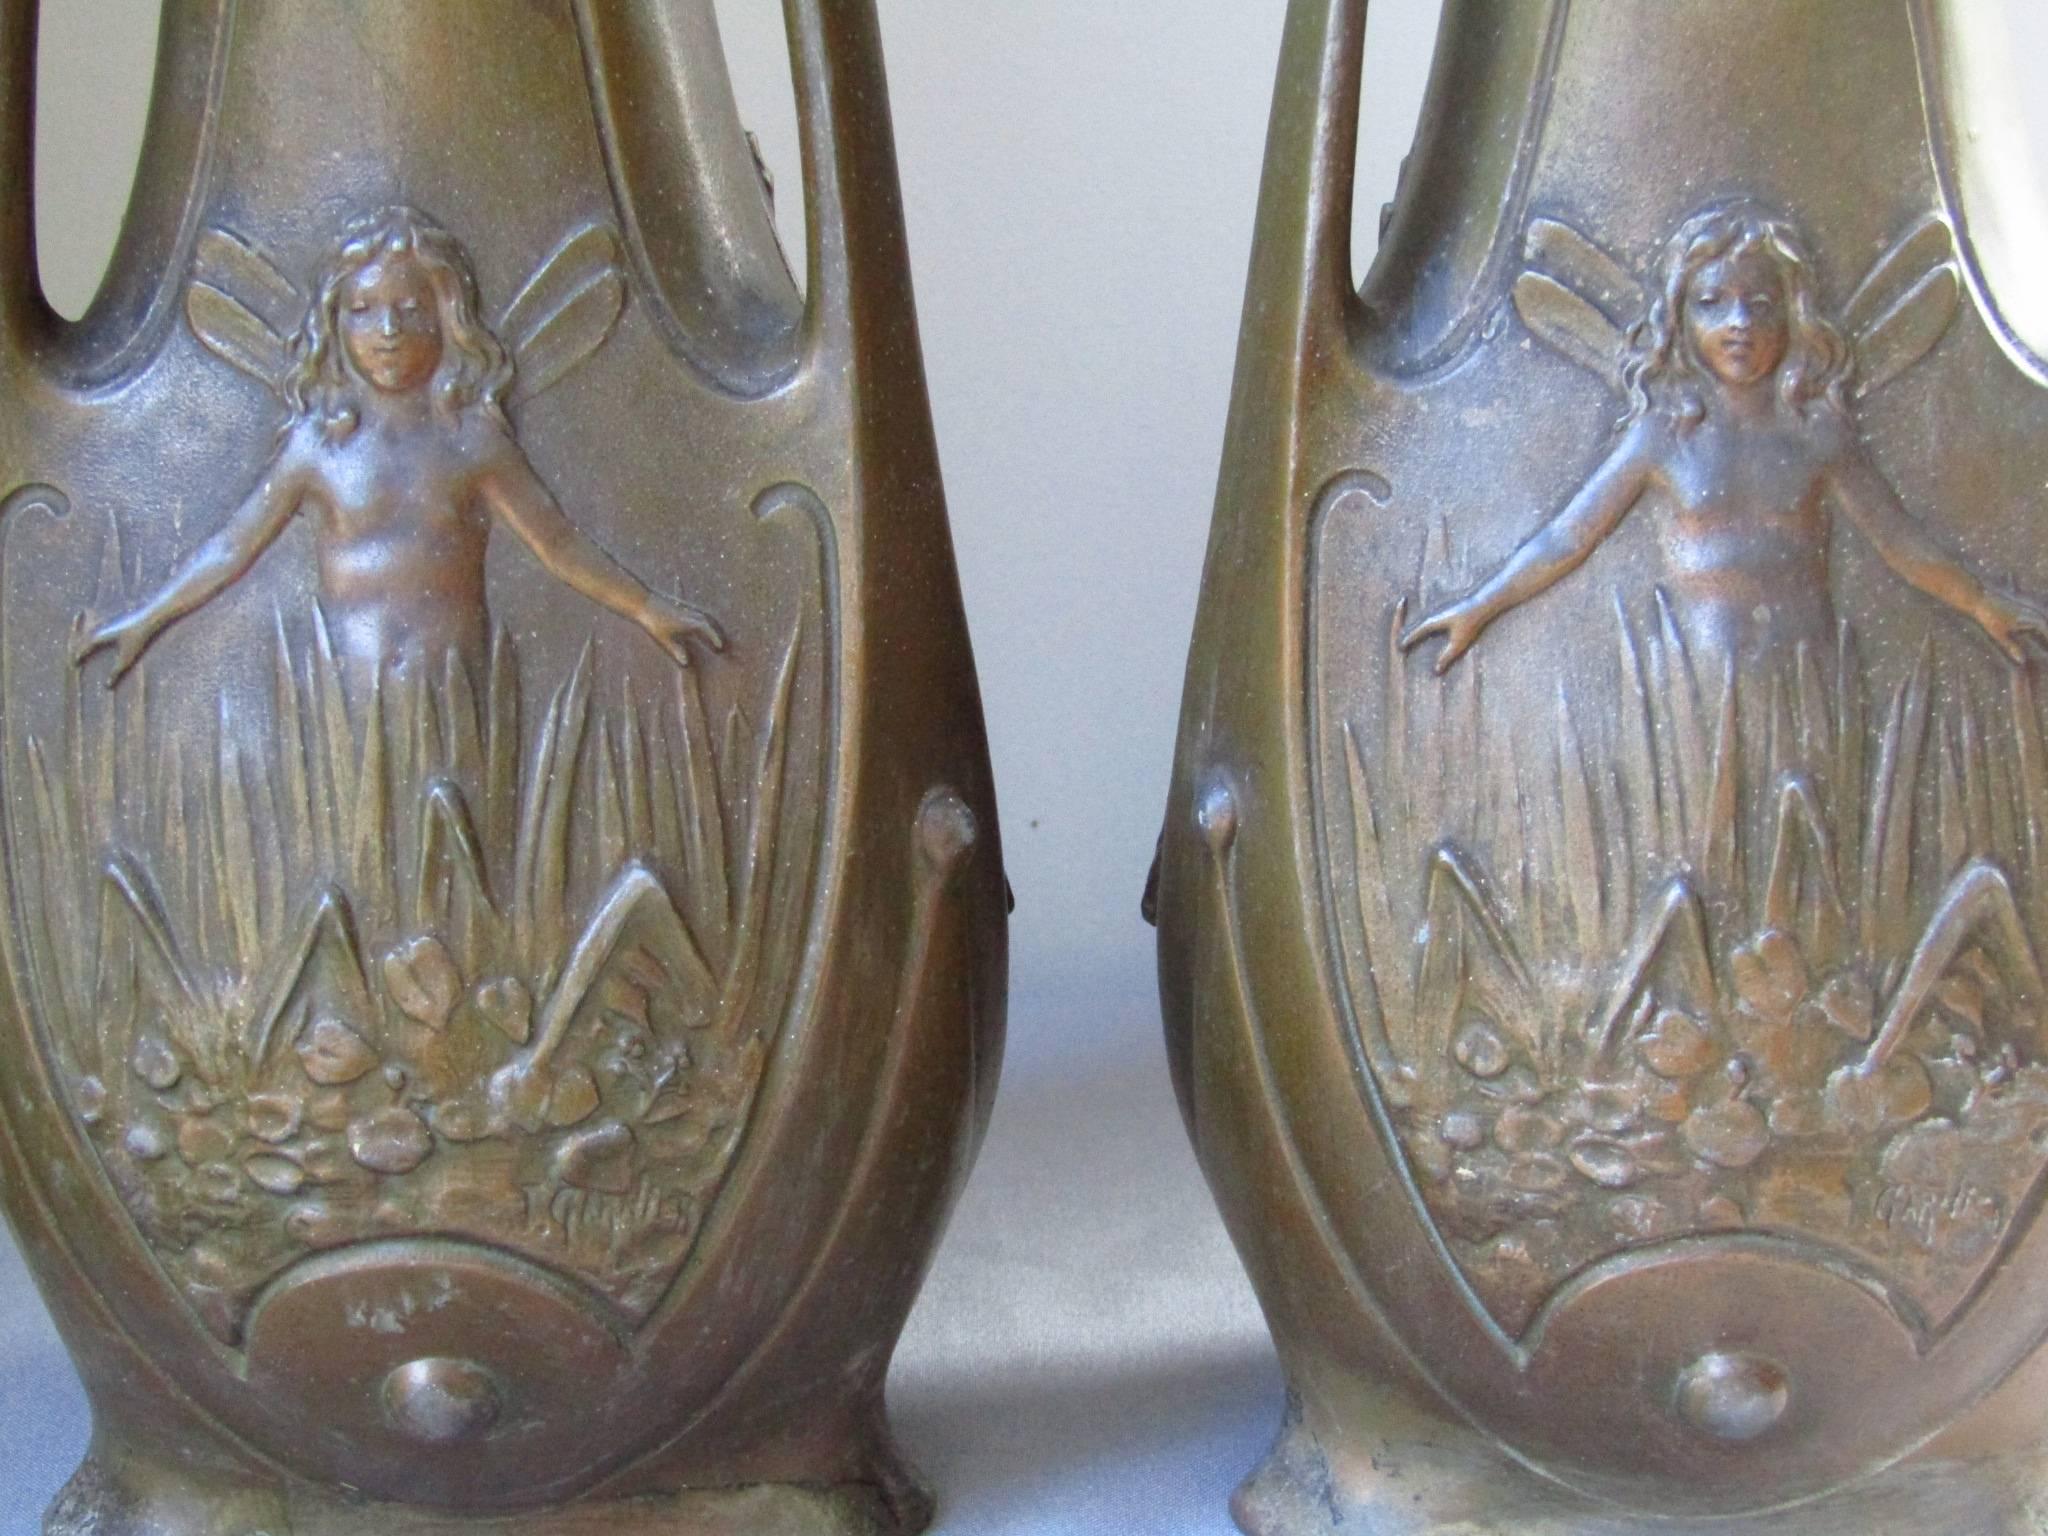 Early 20th Century Pair of Art Nouveau Bronze Patinated Vases by J. Garnier, France, 1900